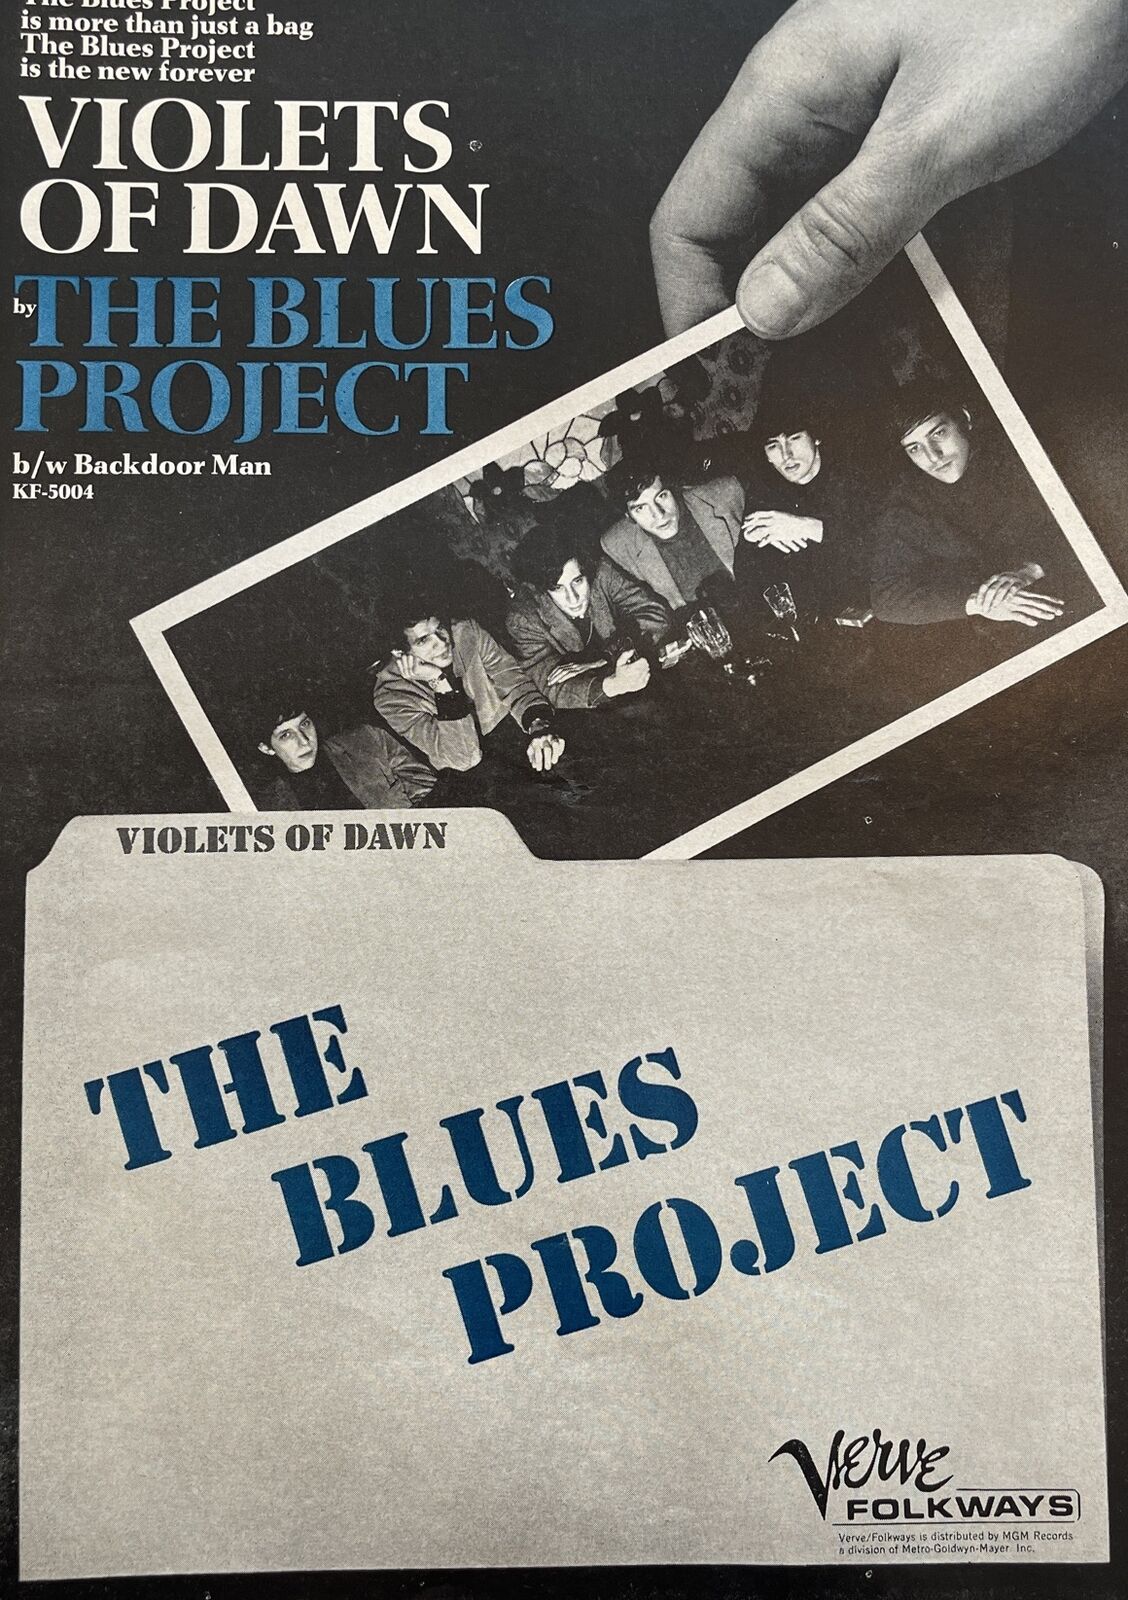 Vintage 1966 Verve Records Music Print Ad Blues Project Violets of Dawn